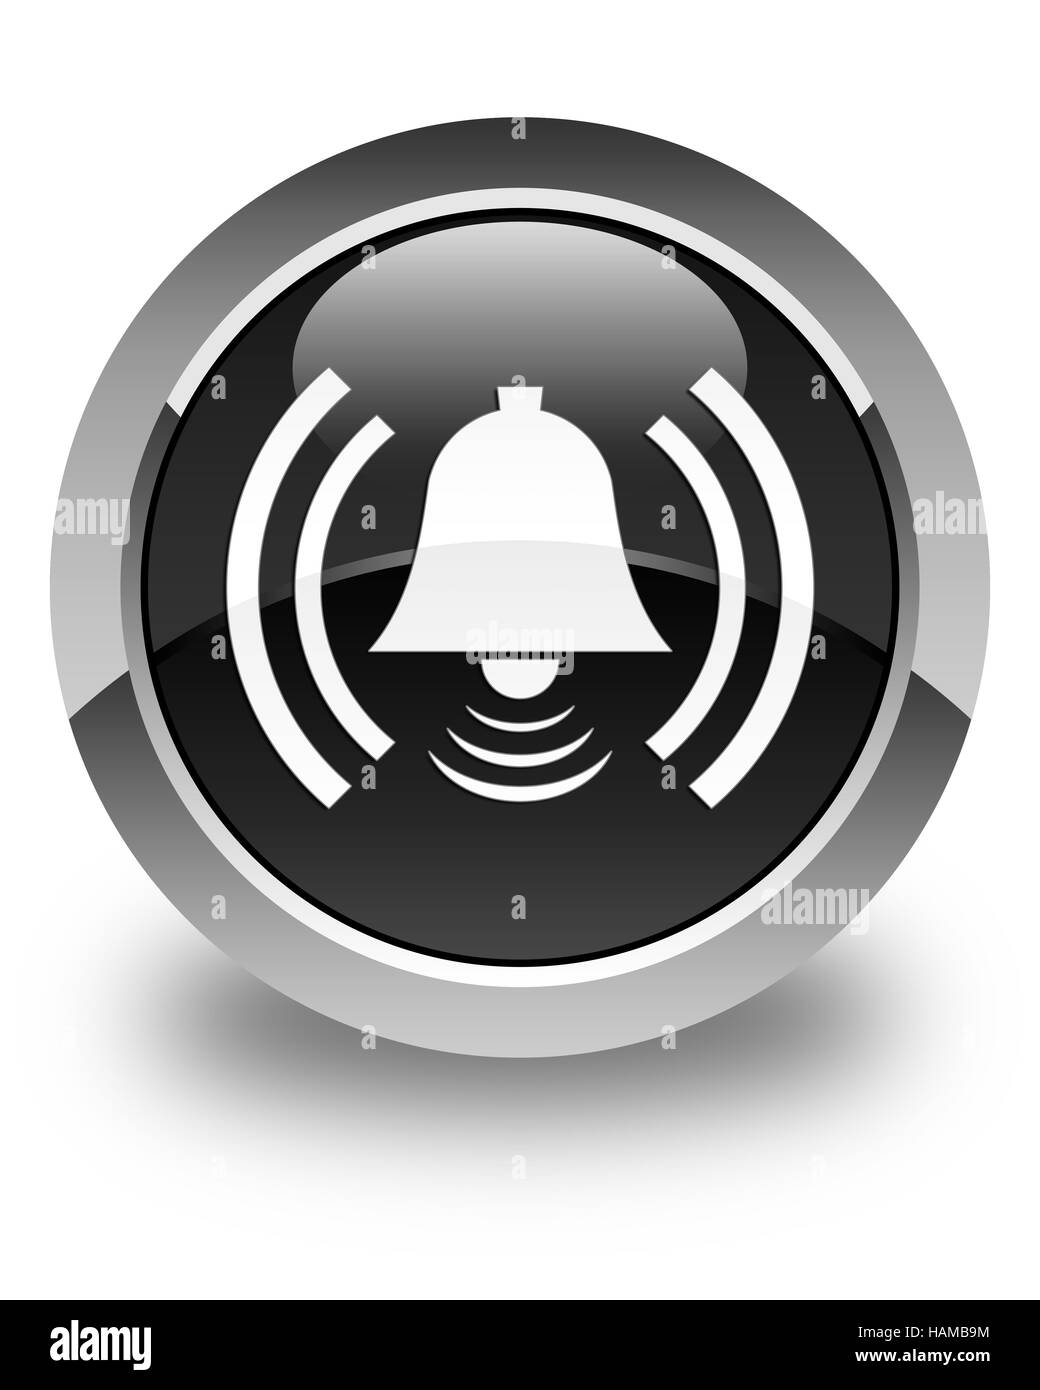 Alarm icon isolated on glossy black round button abstract illustration Stock Photo